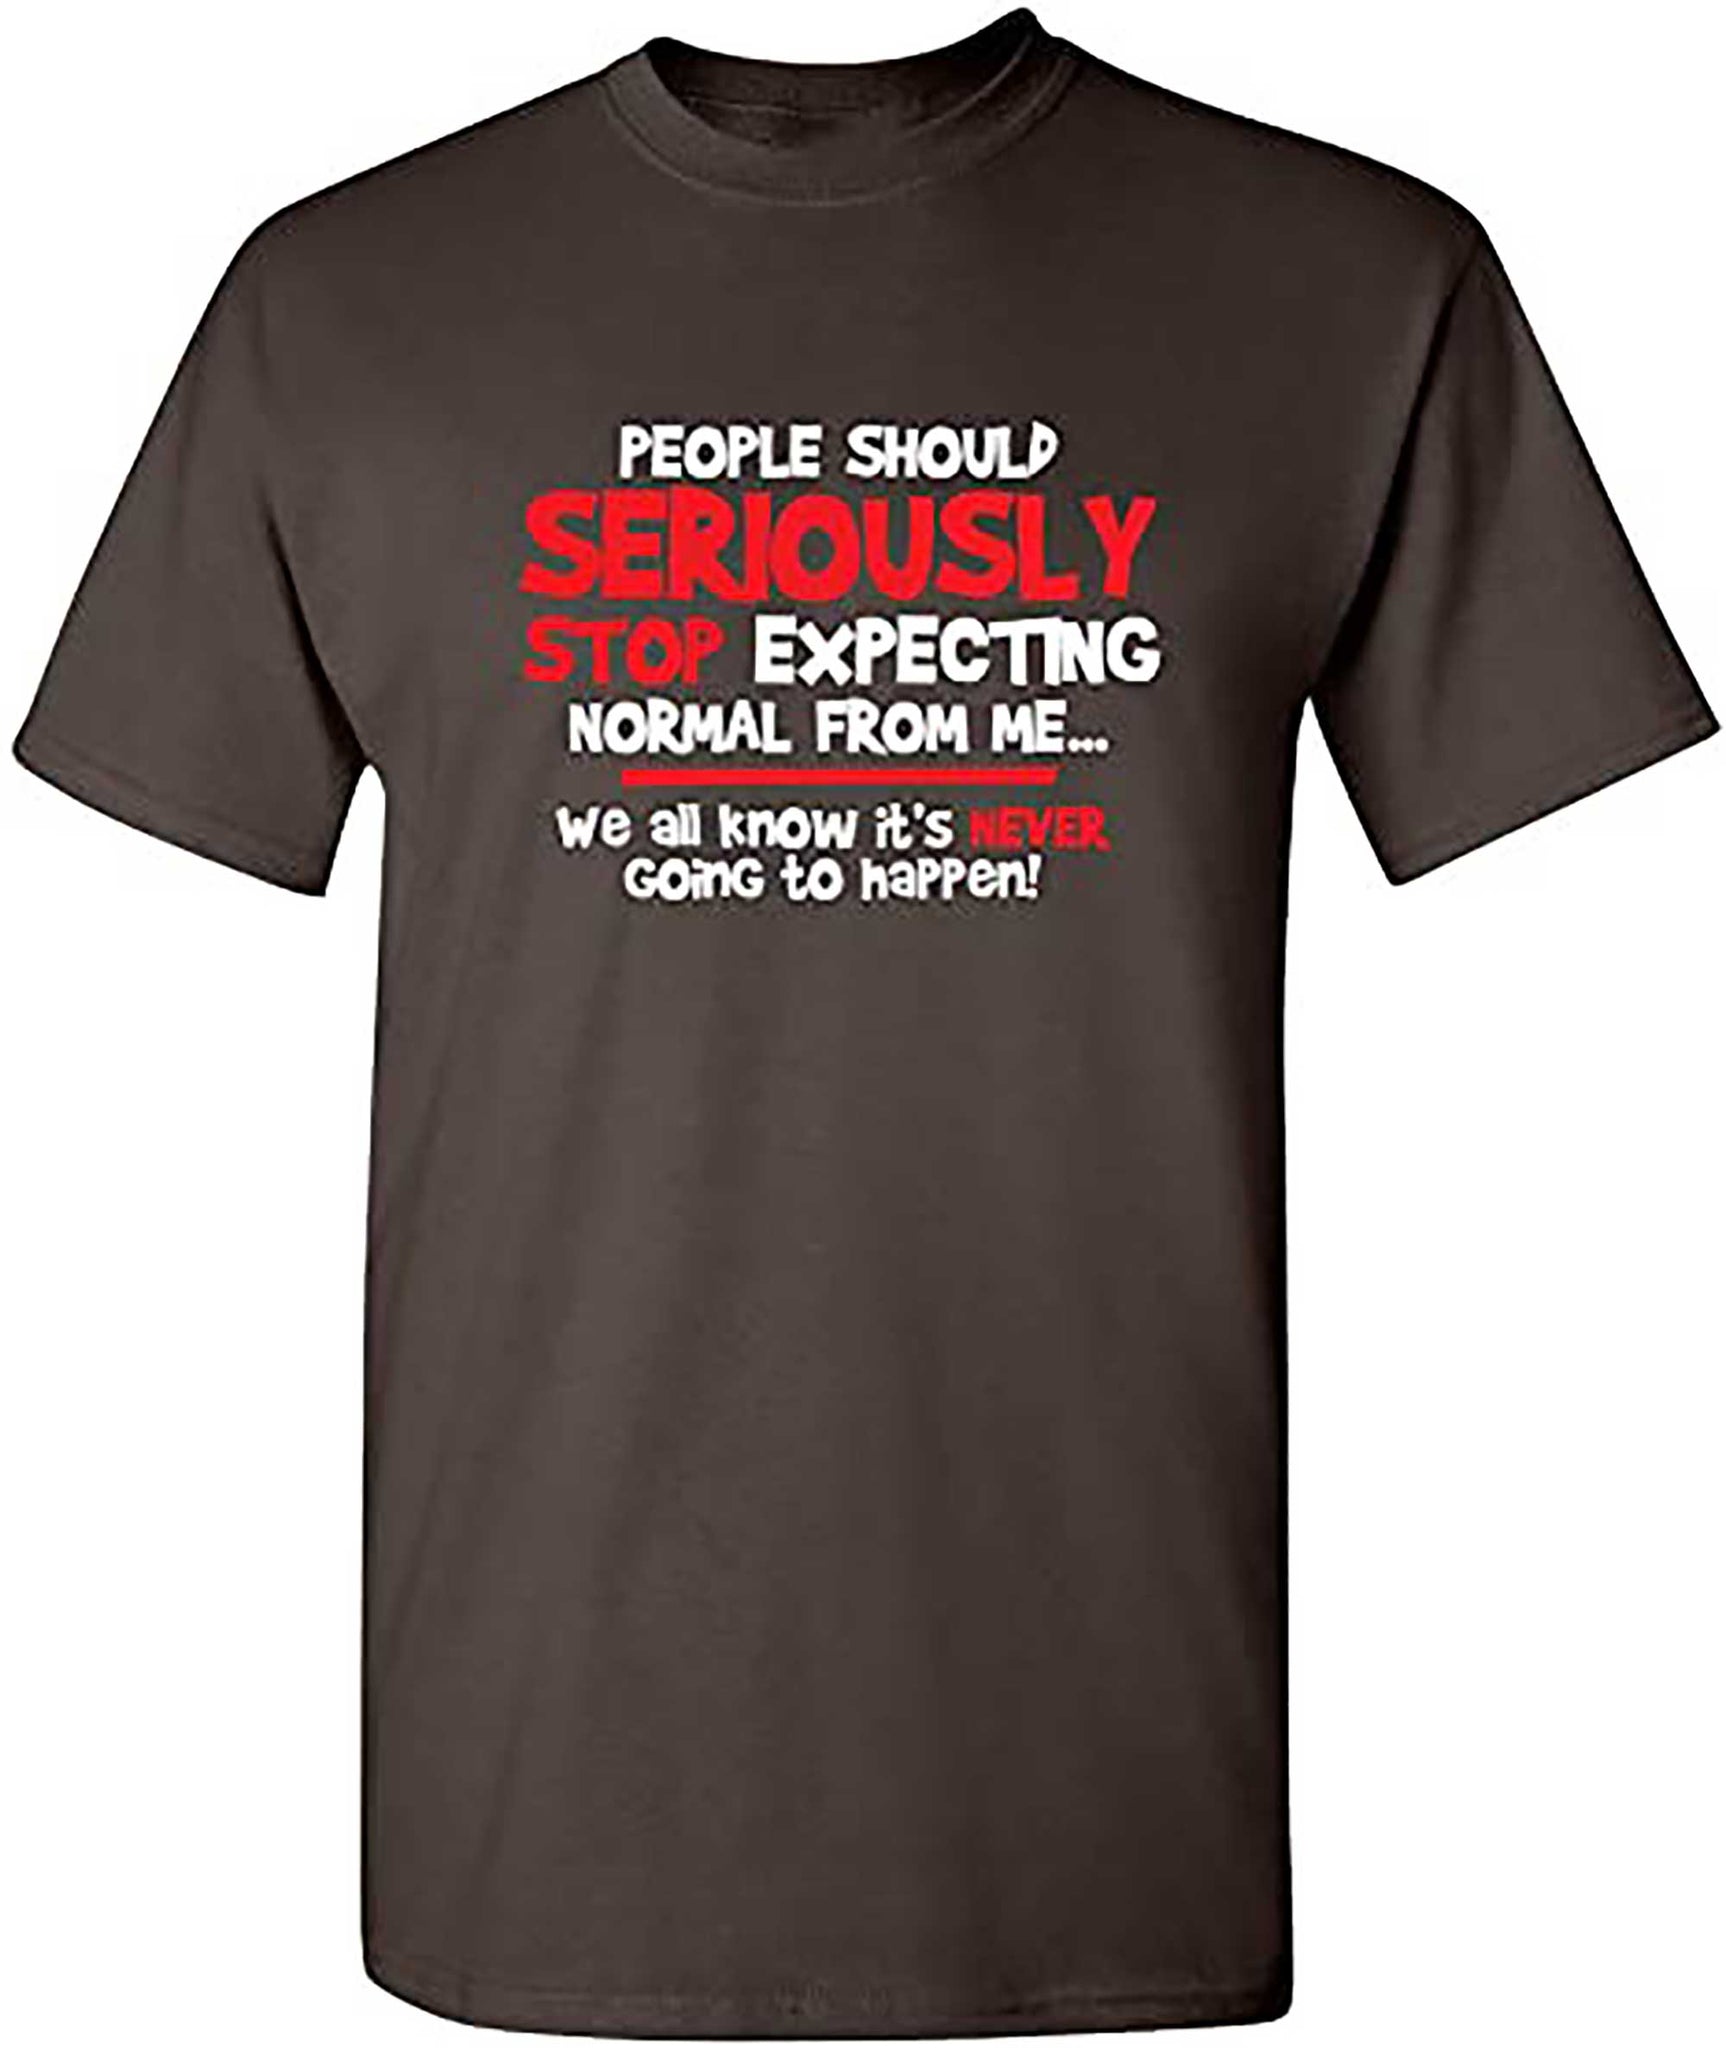 Skitongifts People Should Seriously Graphic Gift Idea Humor Novelty Sarcastic Funny T Shirt